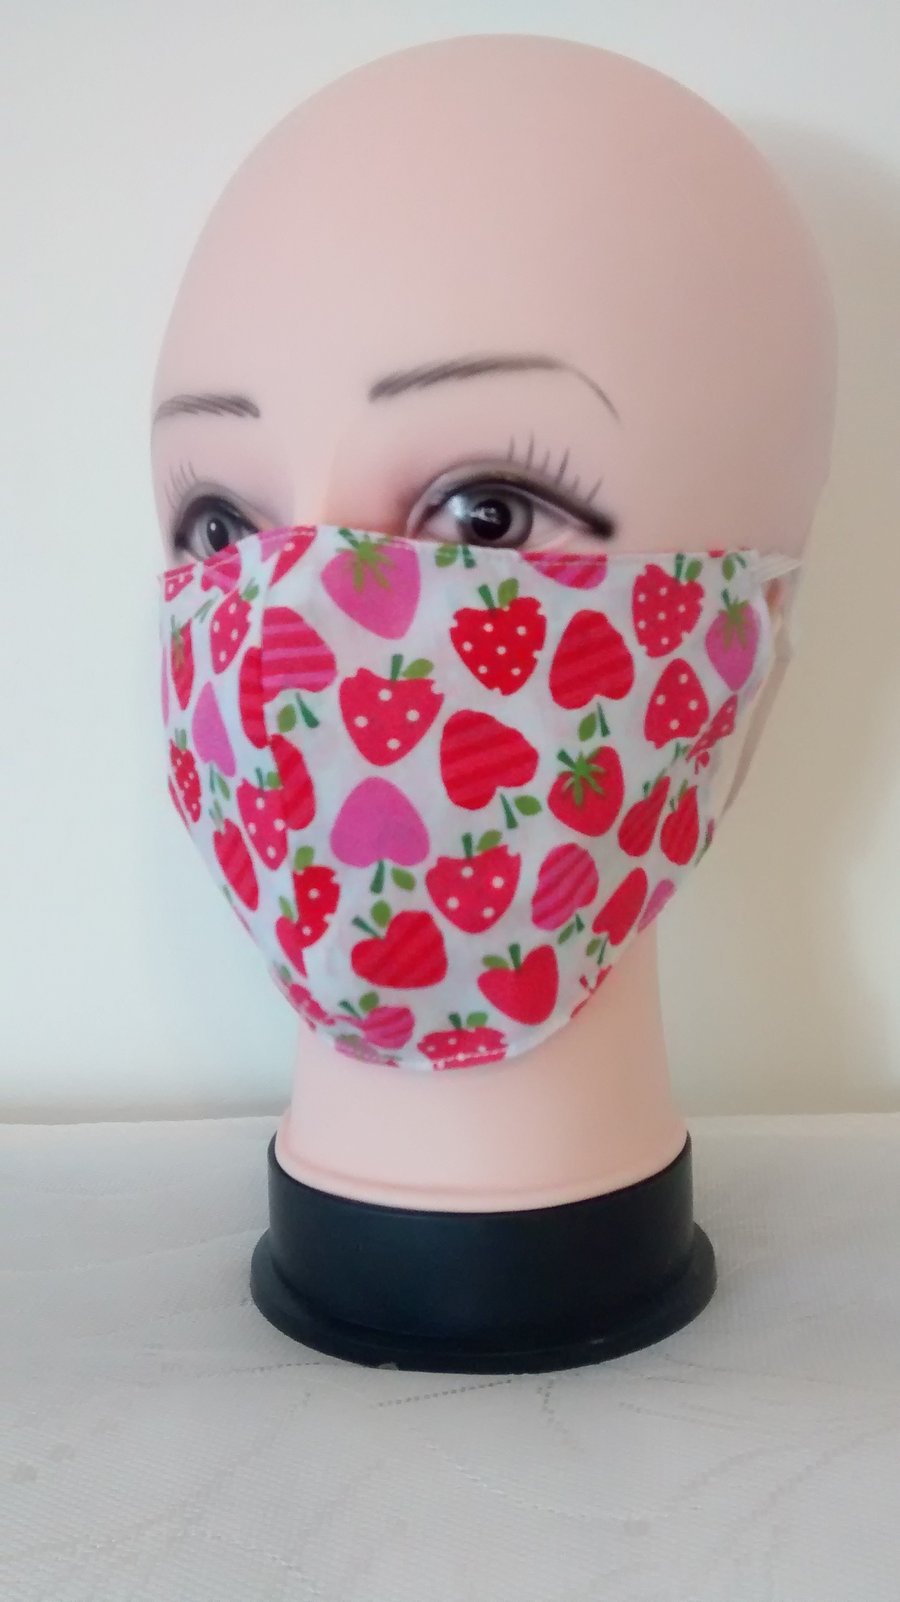 Handmade 3 layers strawberries reusable adult face mask.